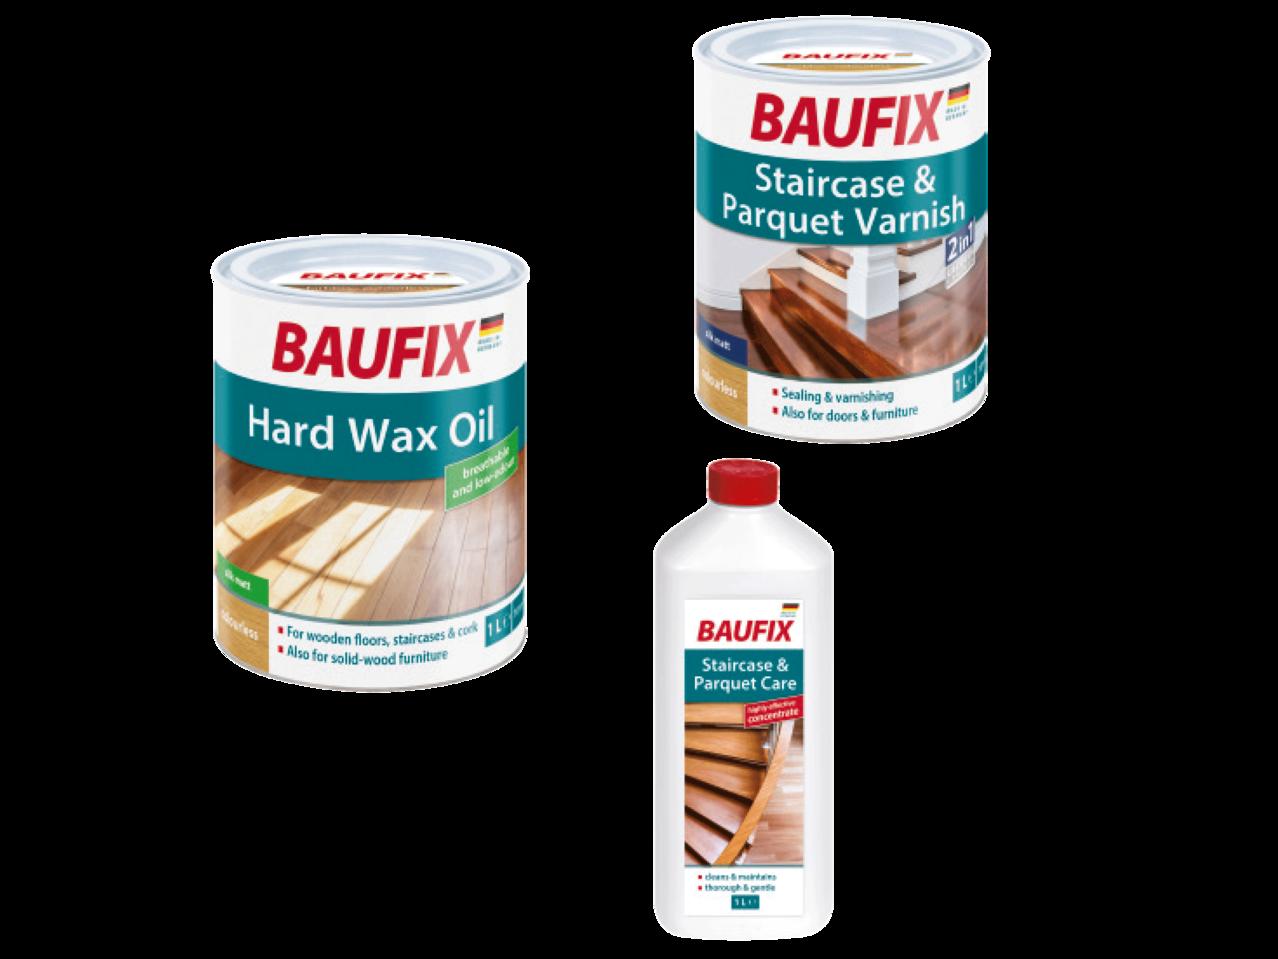 BAUFIX(R) Hard Wax Oil/Staircase and Parquet Varnish